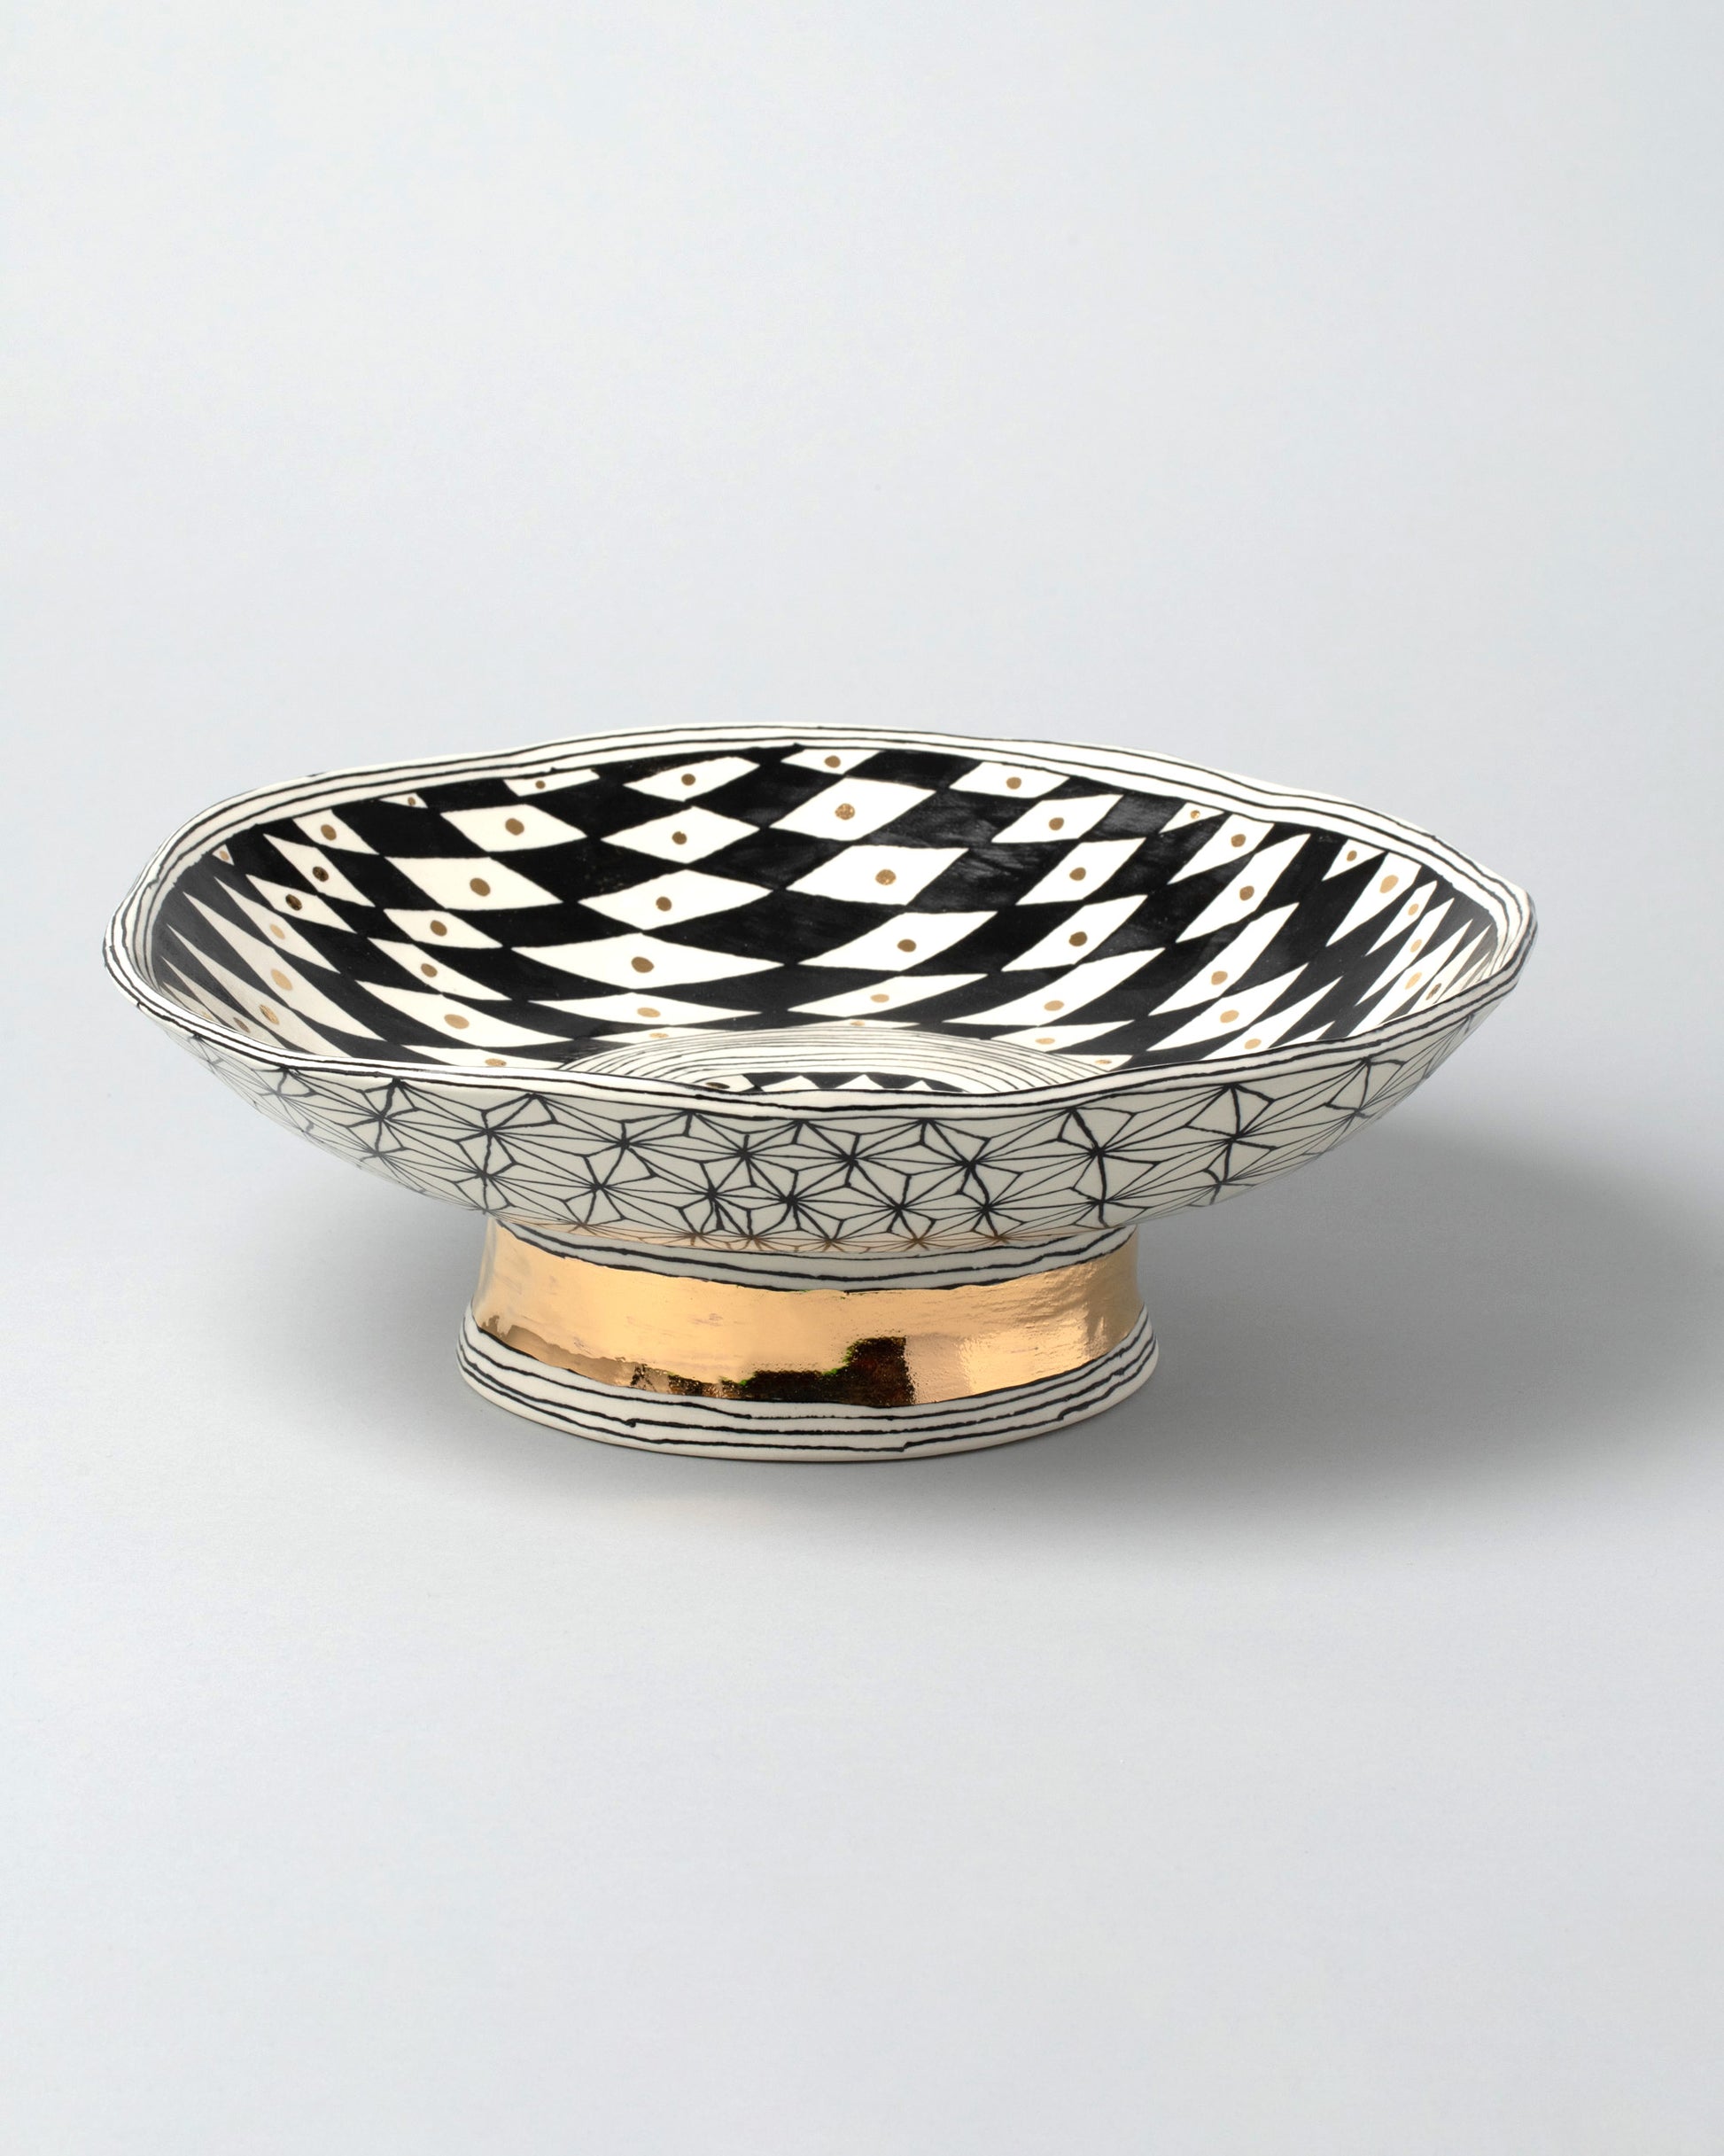 Suzanne Sullivan Two Footed Bowl on light color background.